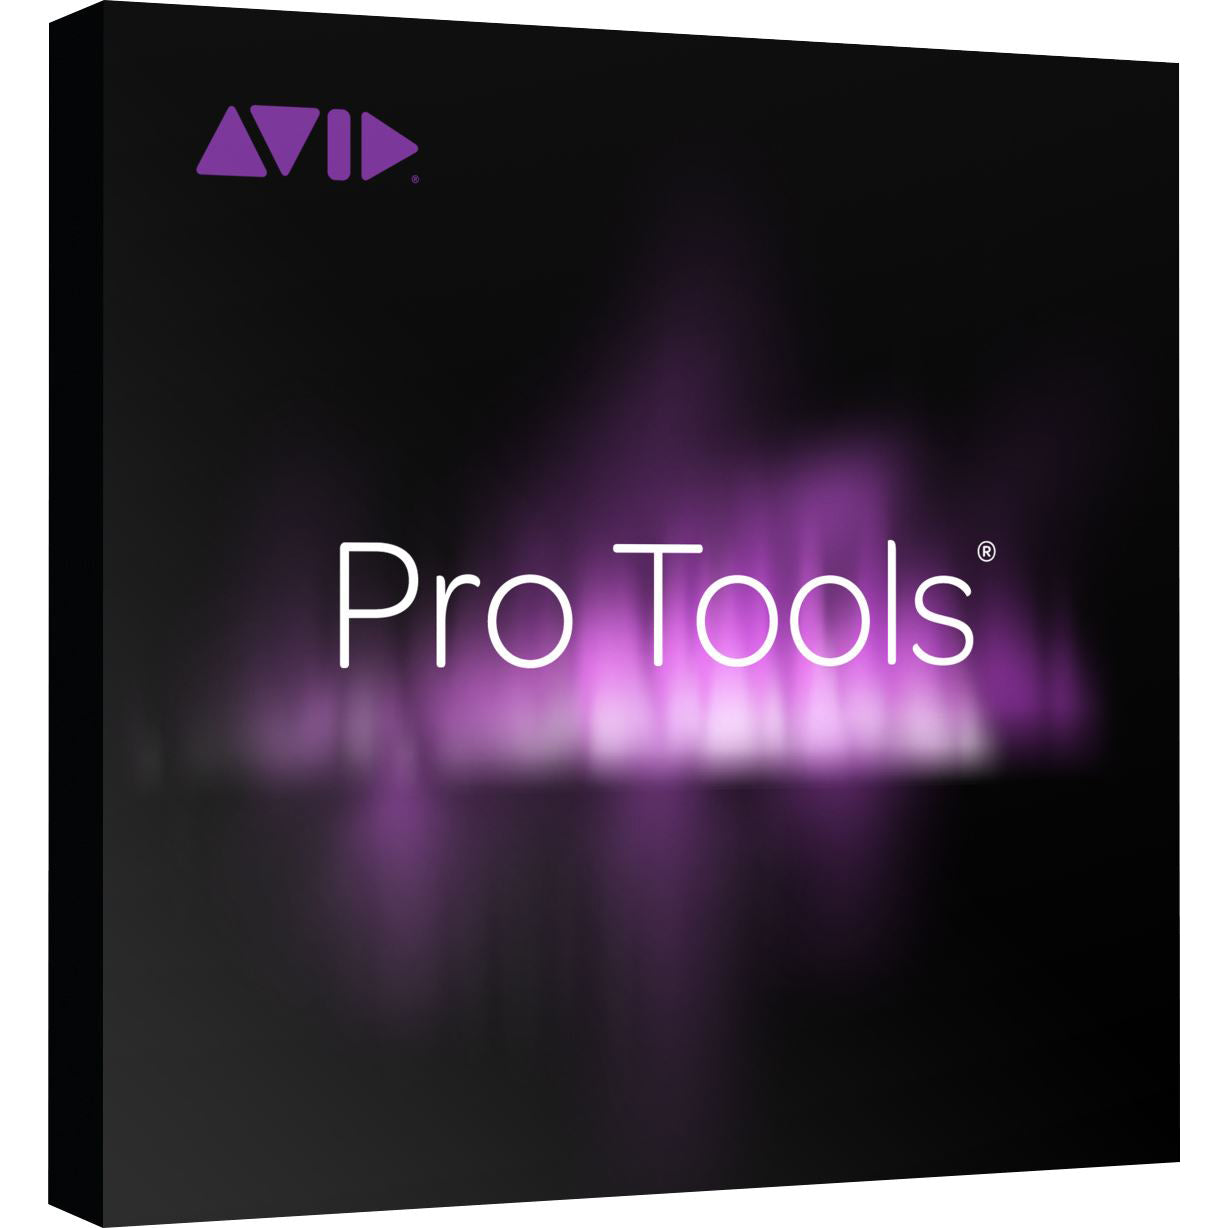 Avid Pro Tools | Studio Perpetual w/ 1-Year of Updates + Support Plan